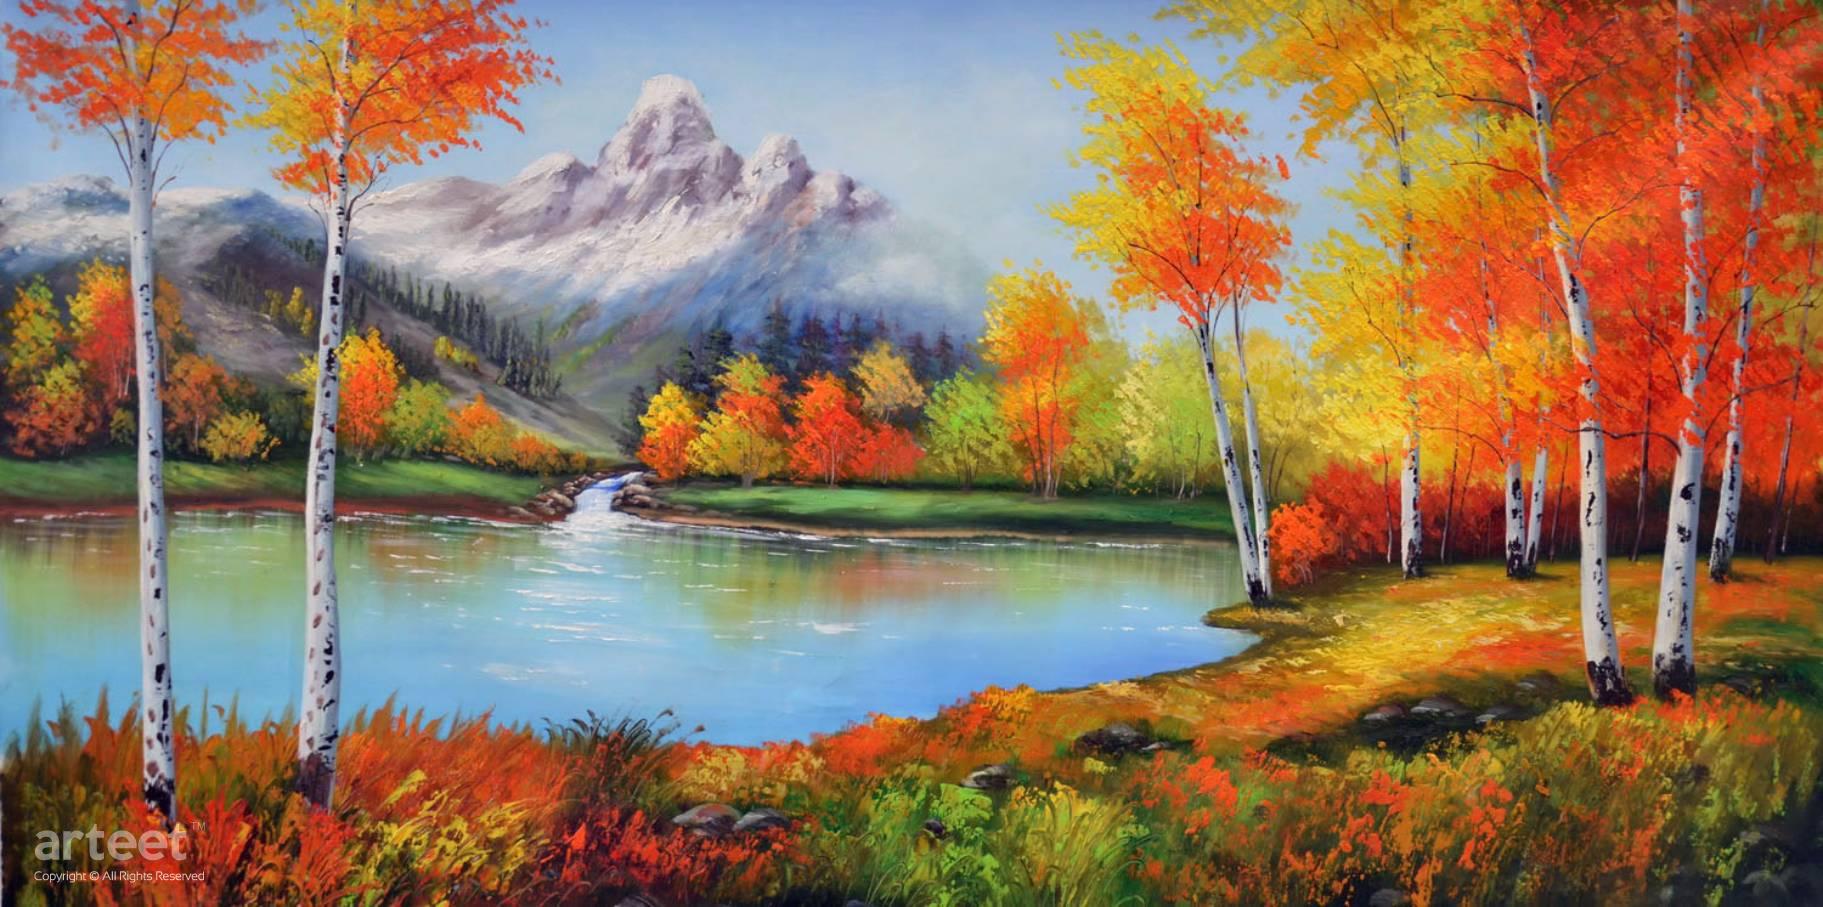 Autumn Symphony | Art Paintings for Sale, Online Gallery